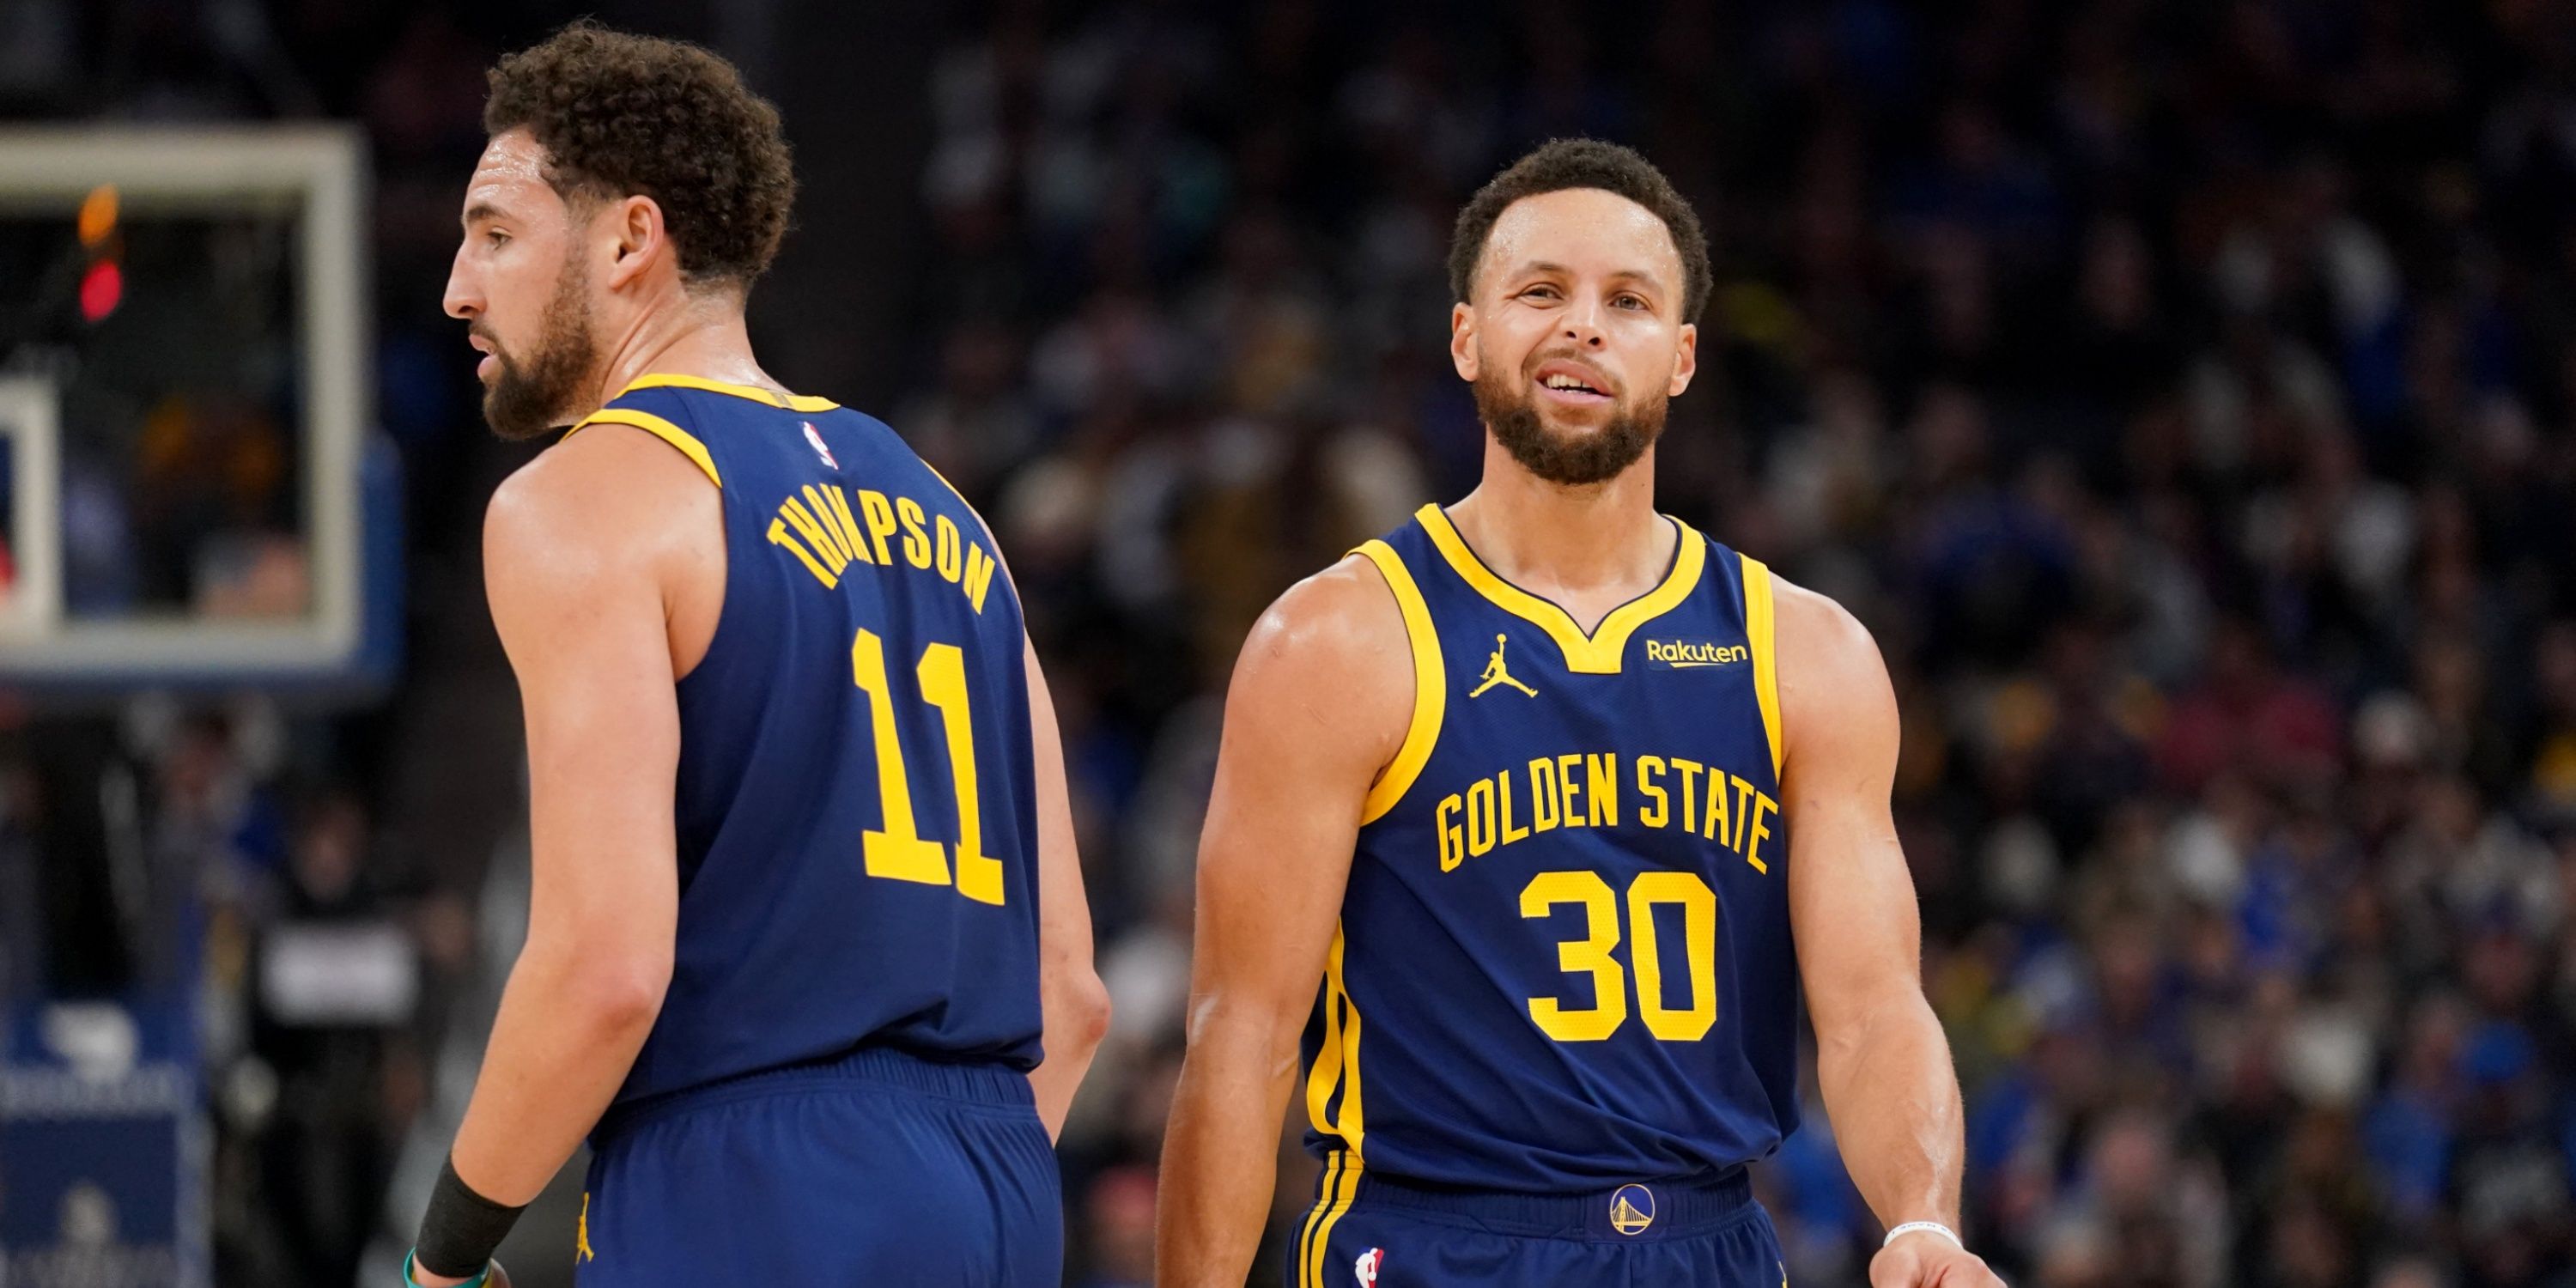 Stephen Curry Klay Thompson Golden State Warriors